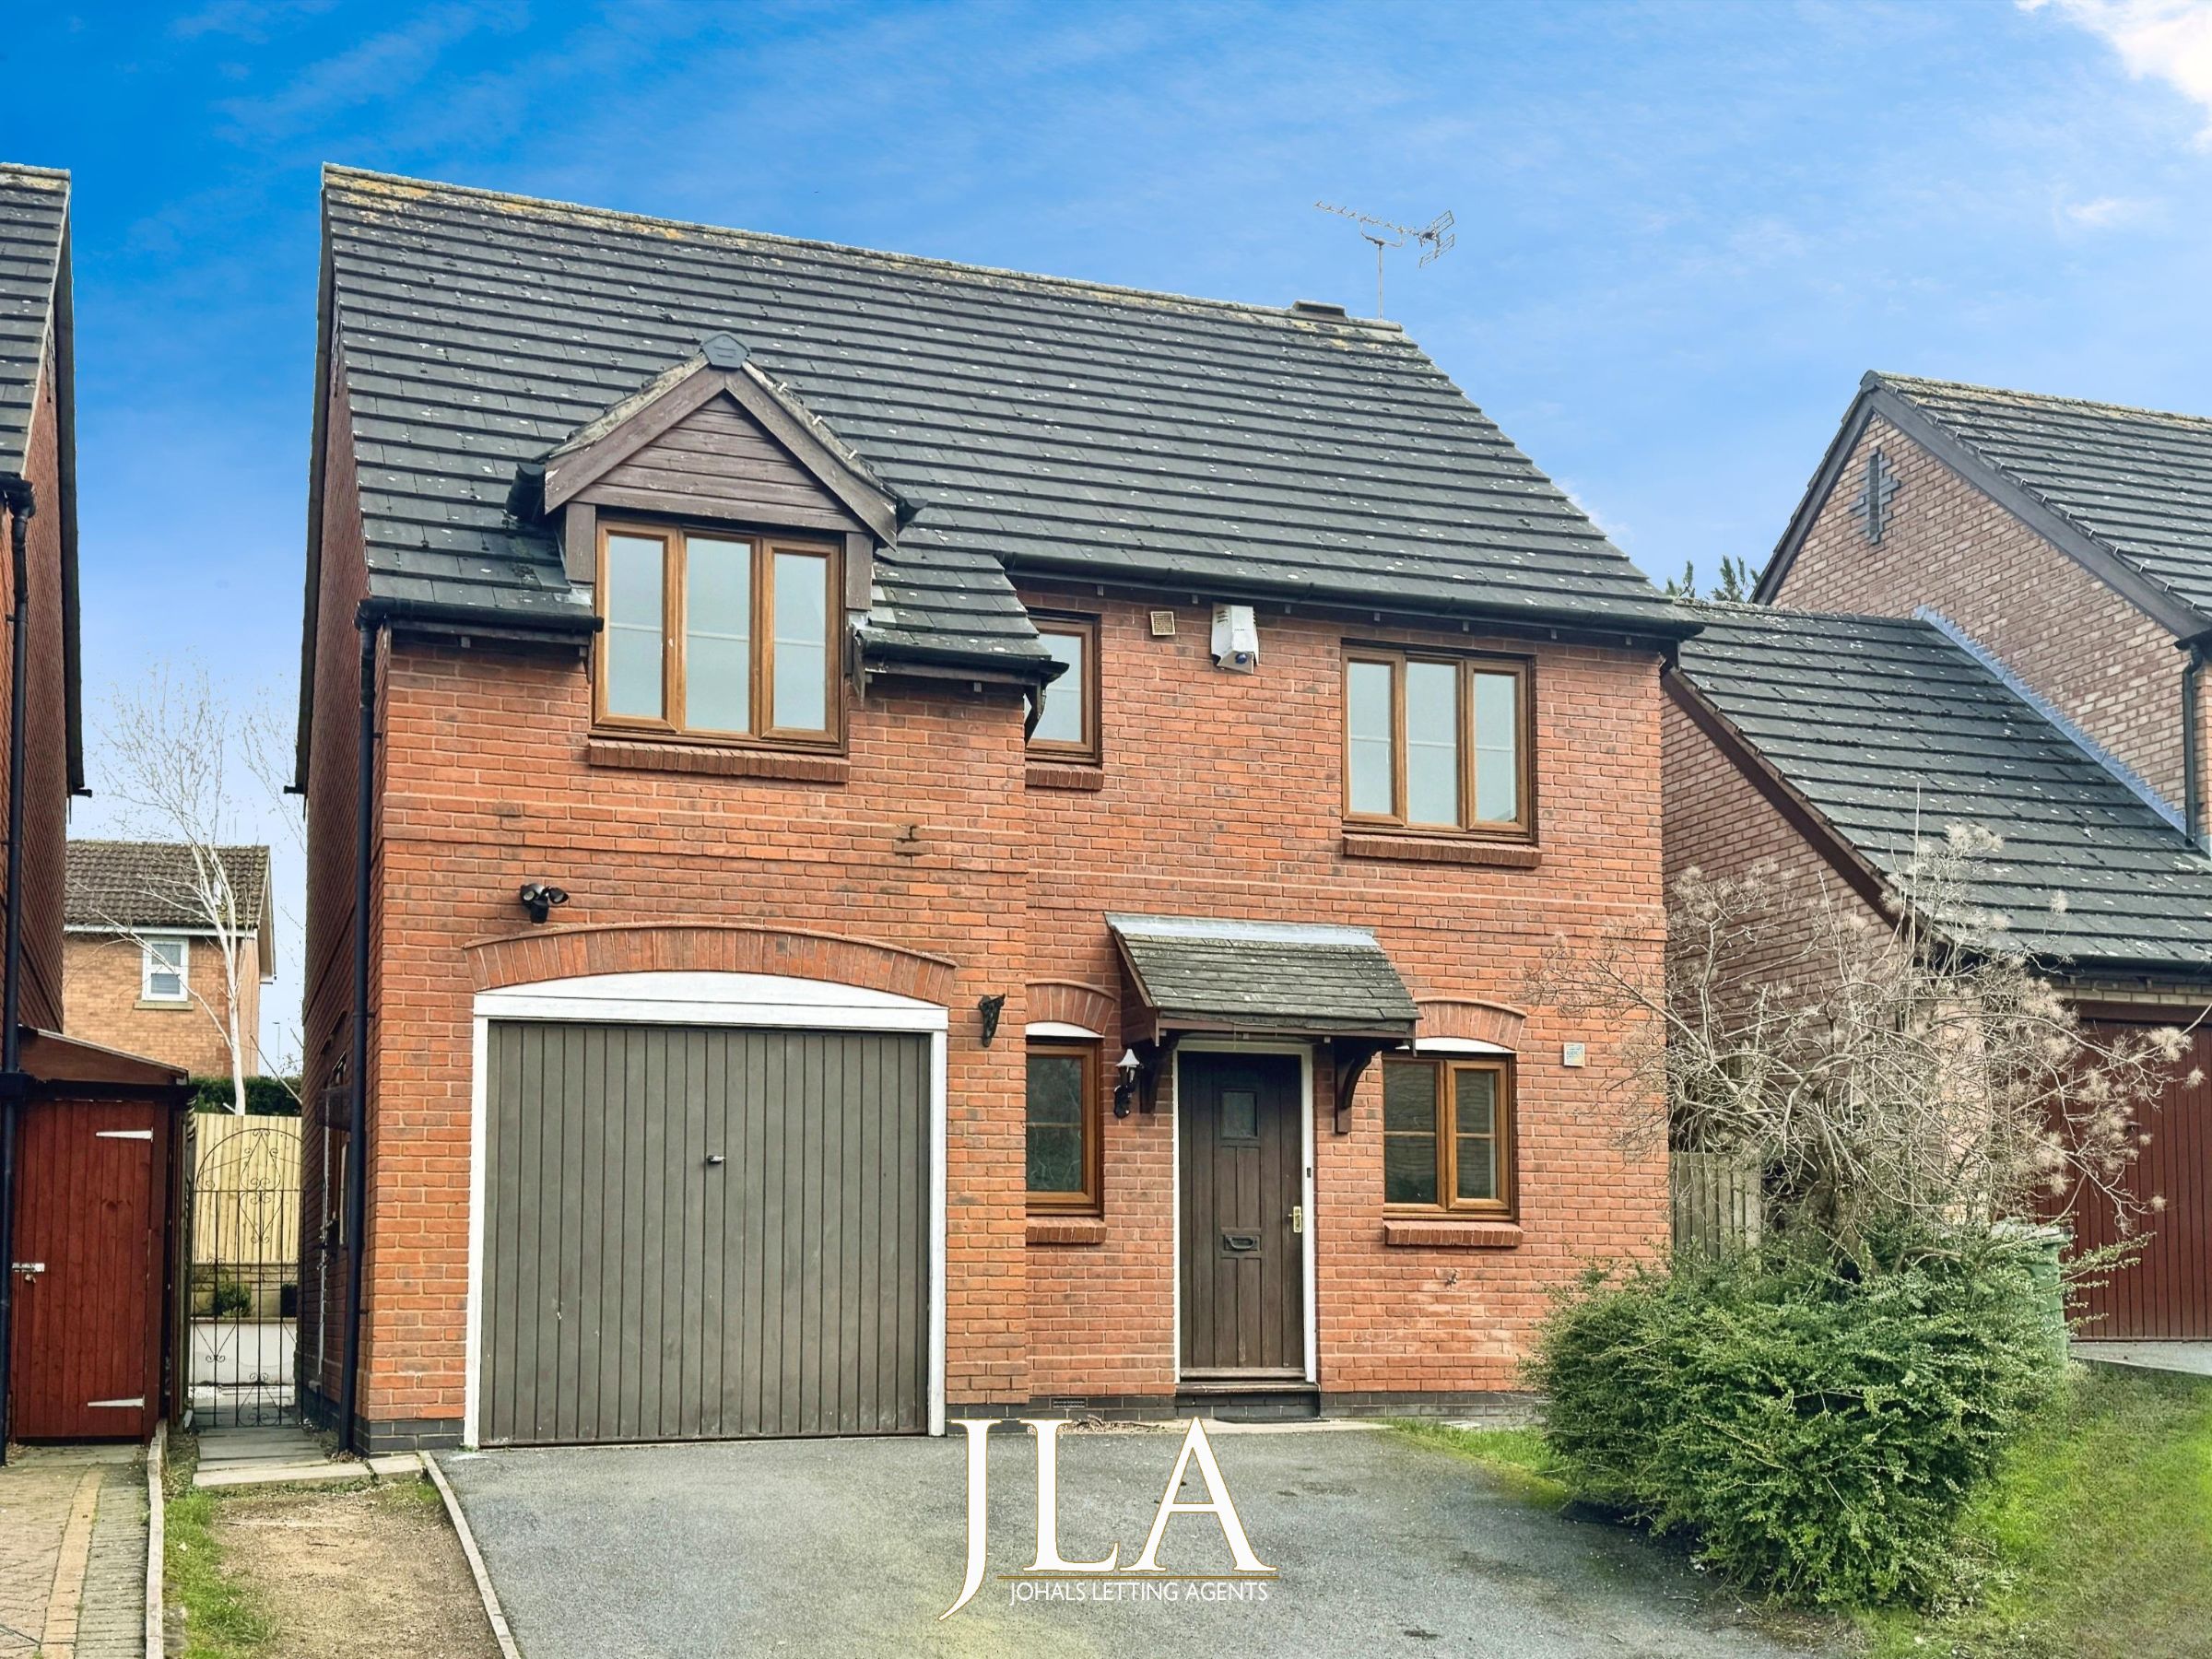 4 bed detached house to rent in Elliot Close, Leicester, LE2 